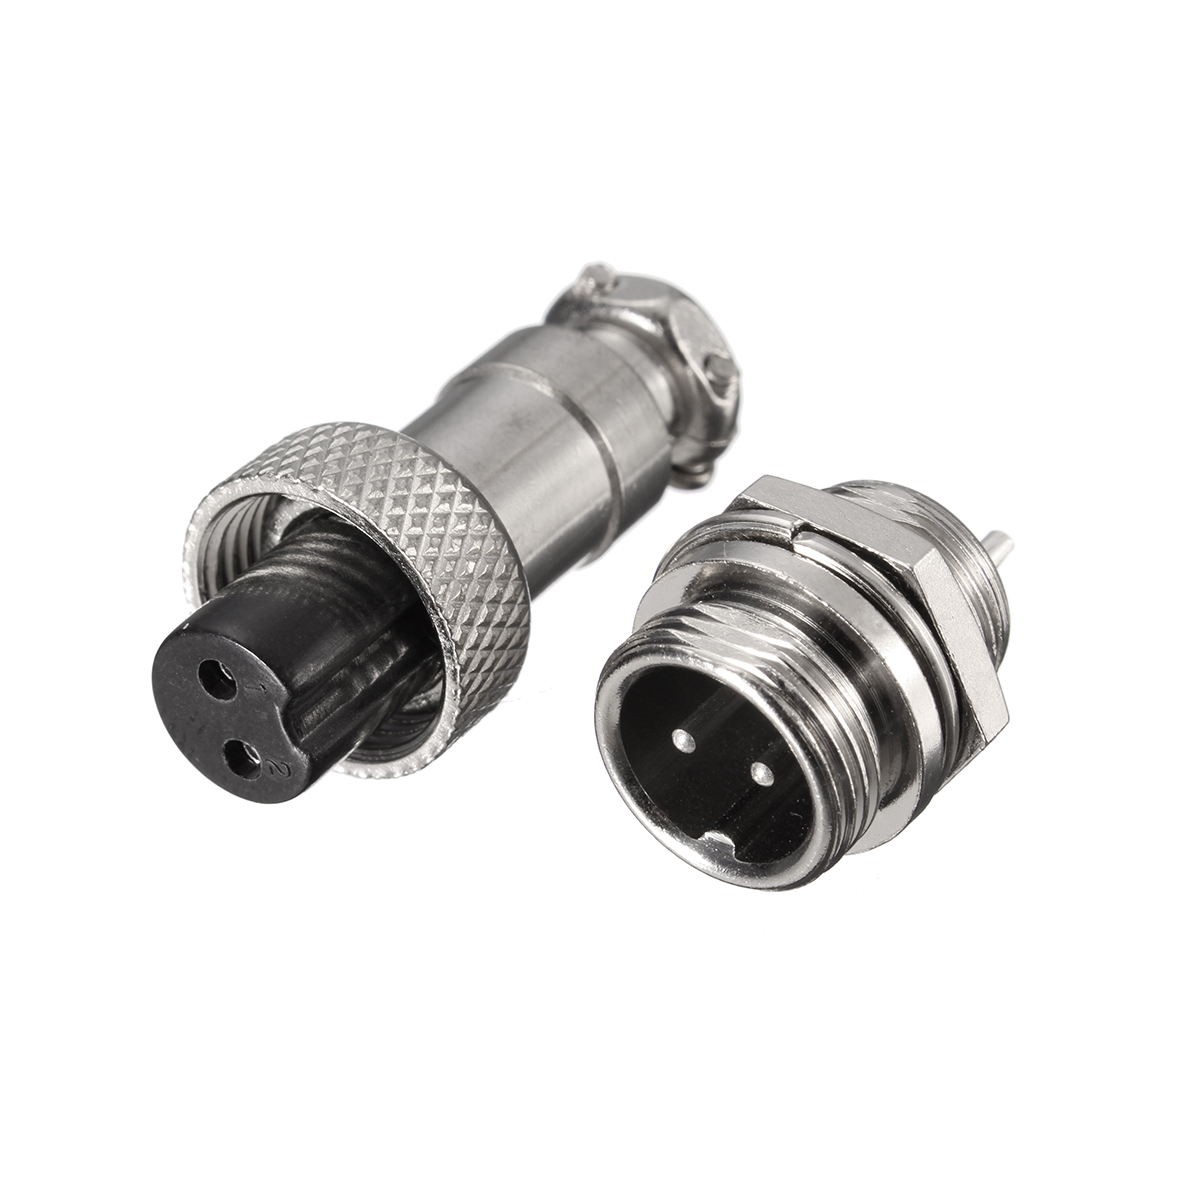 Excellwayreg-GX12-2Pin-Aviation-Plug-MaleFemale-12mm-Wire-Panel-Connector-Adapter-1138924-4